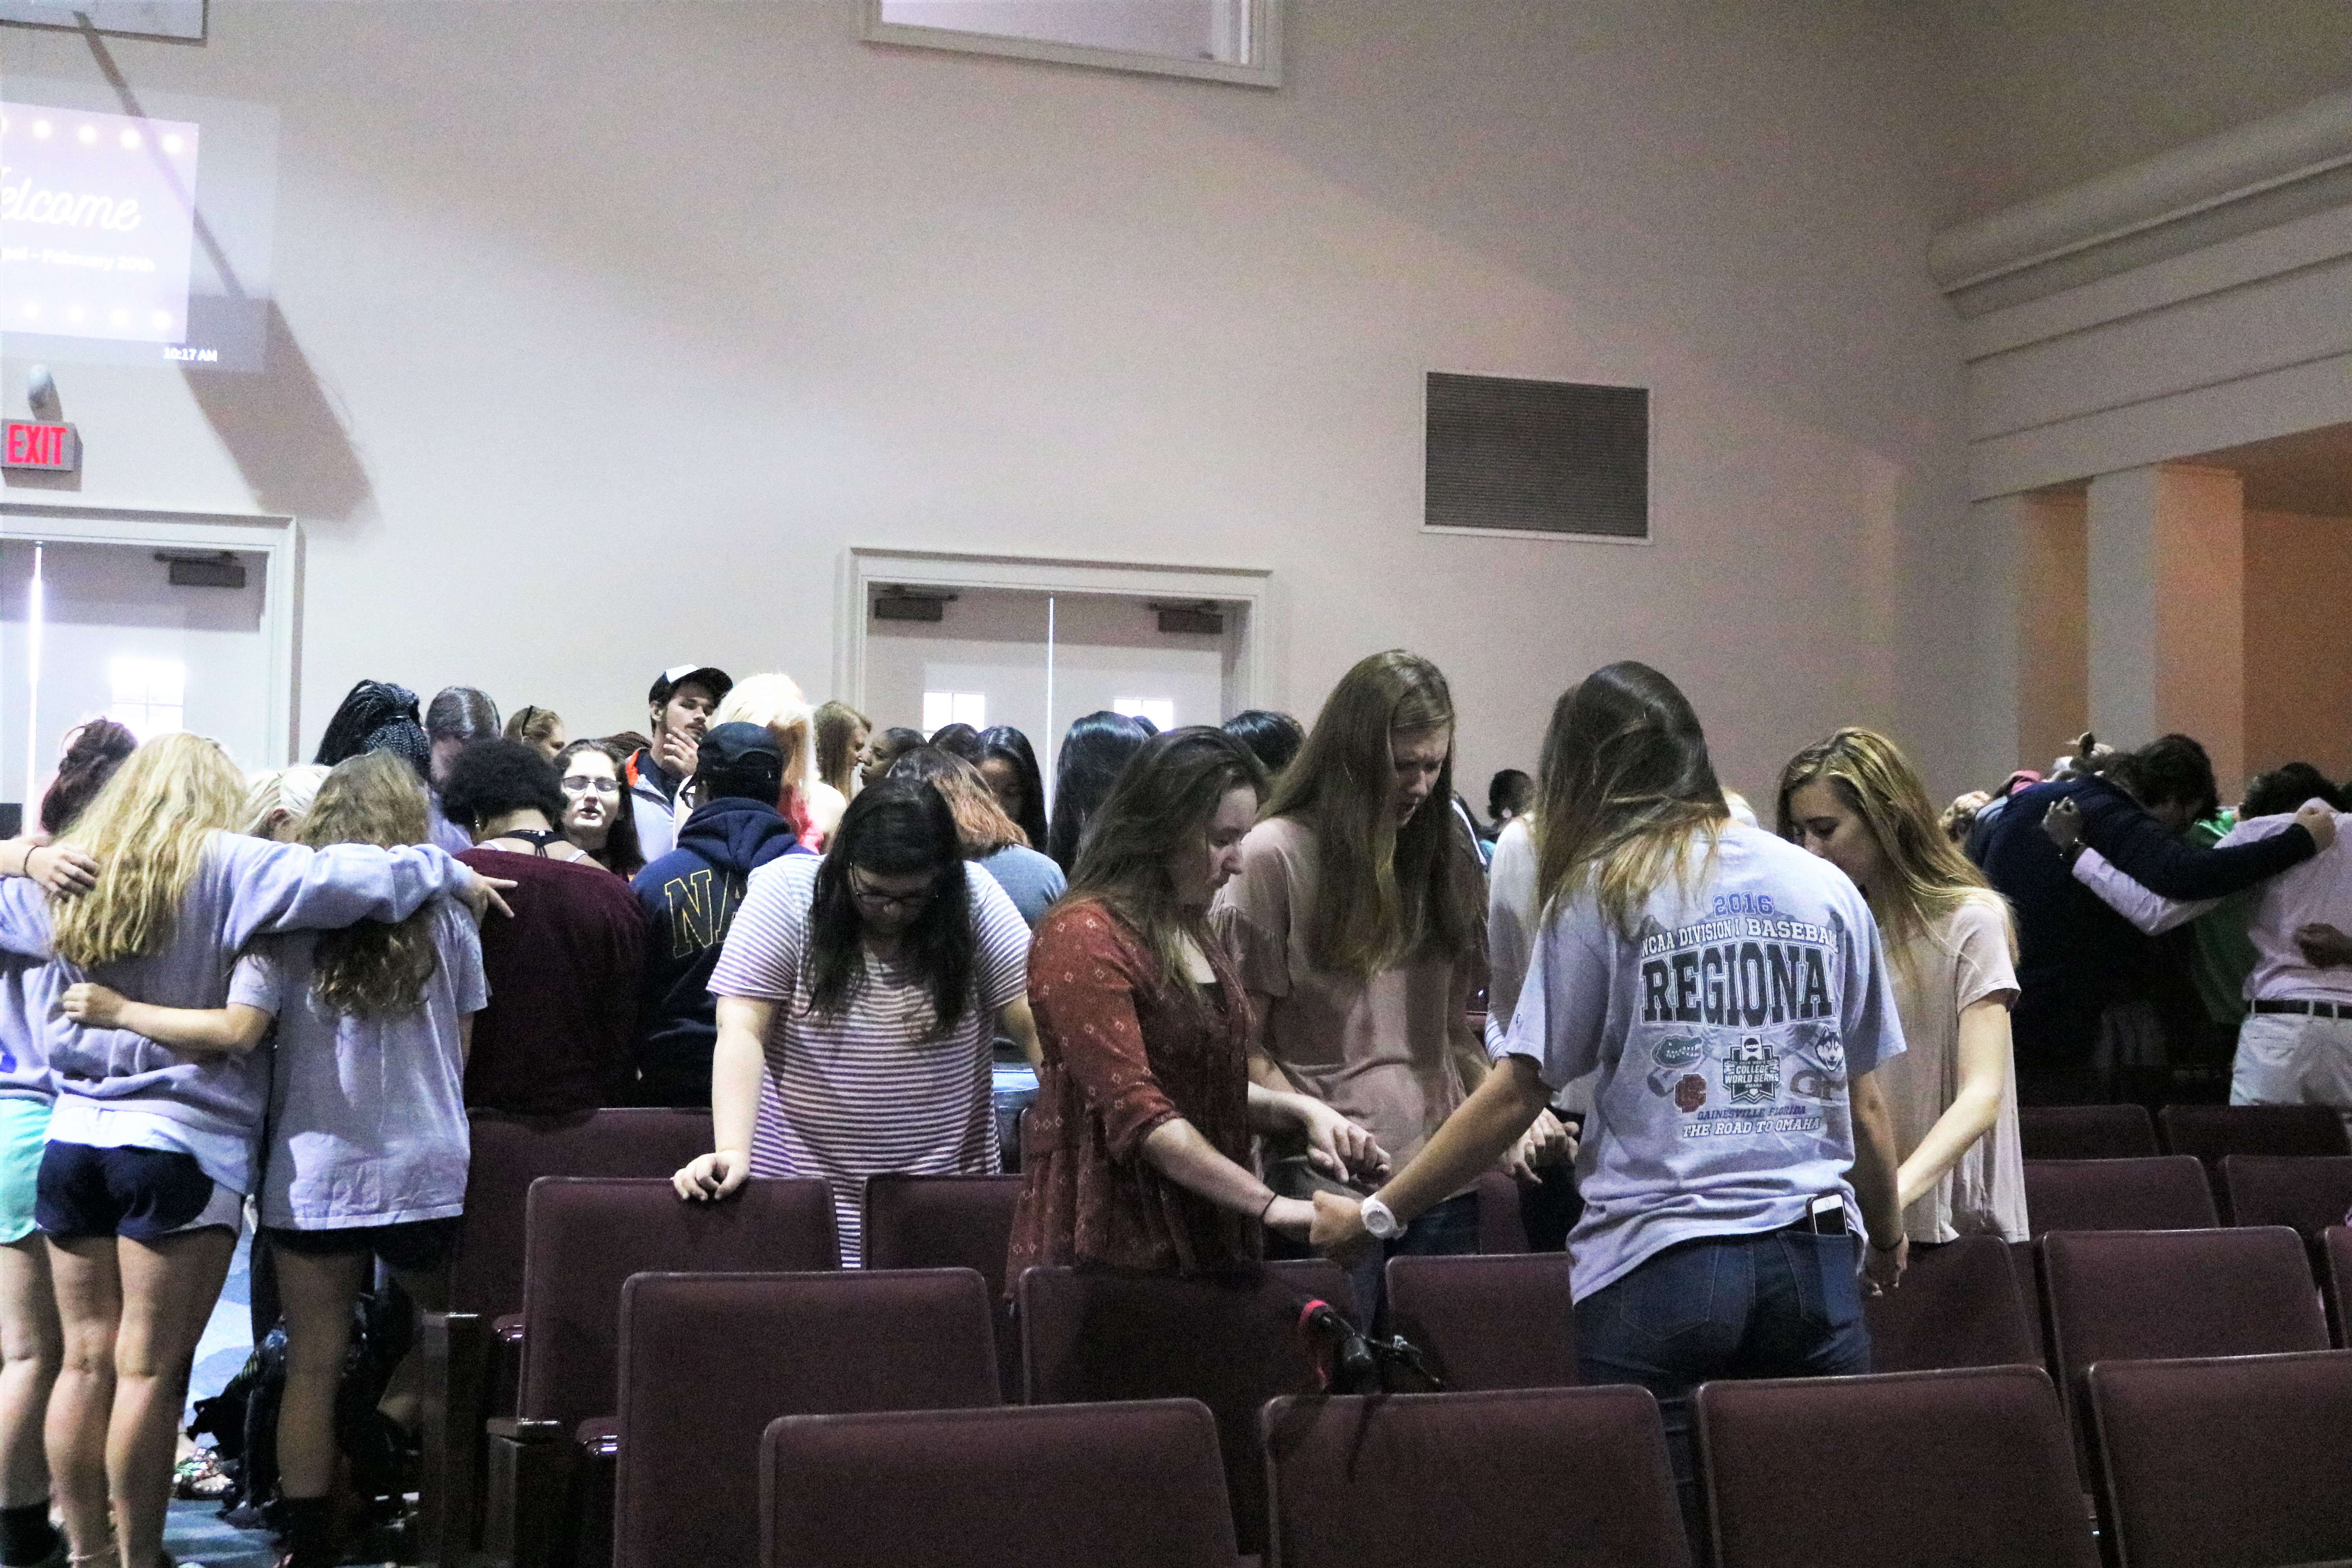 Students form prayer groups during Brewton-Parker College’s February 20 chapel service. Photo Credit: Jose Carrillo-Garcia